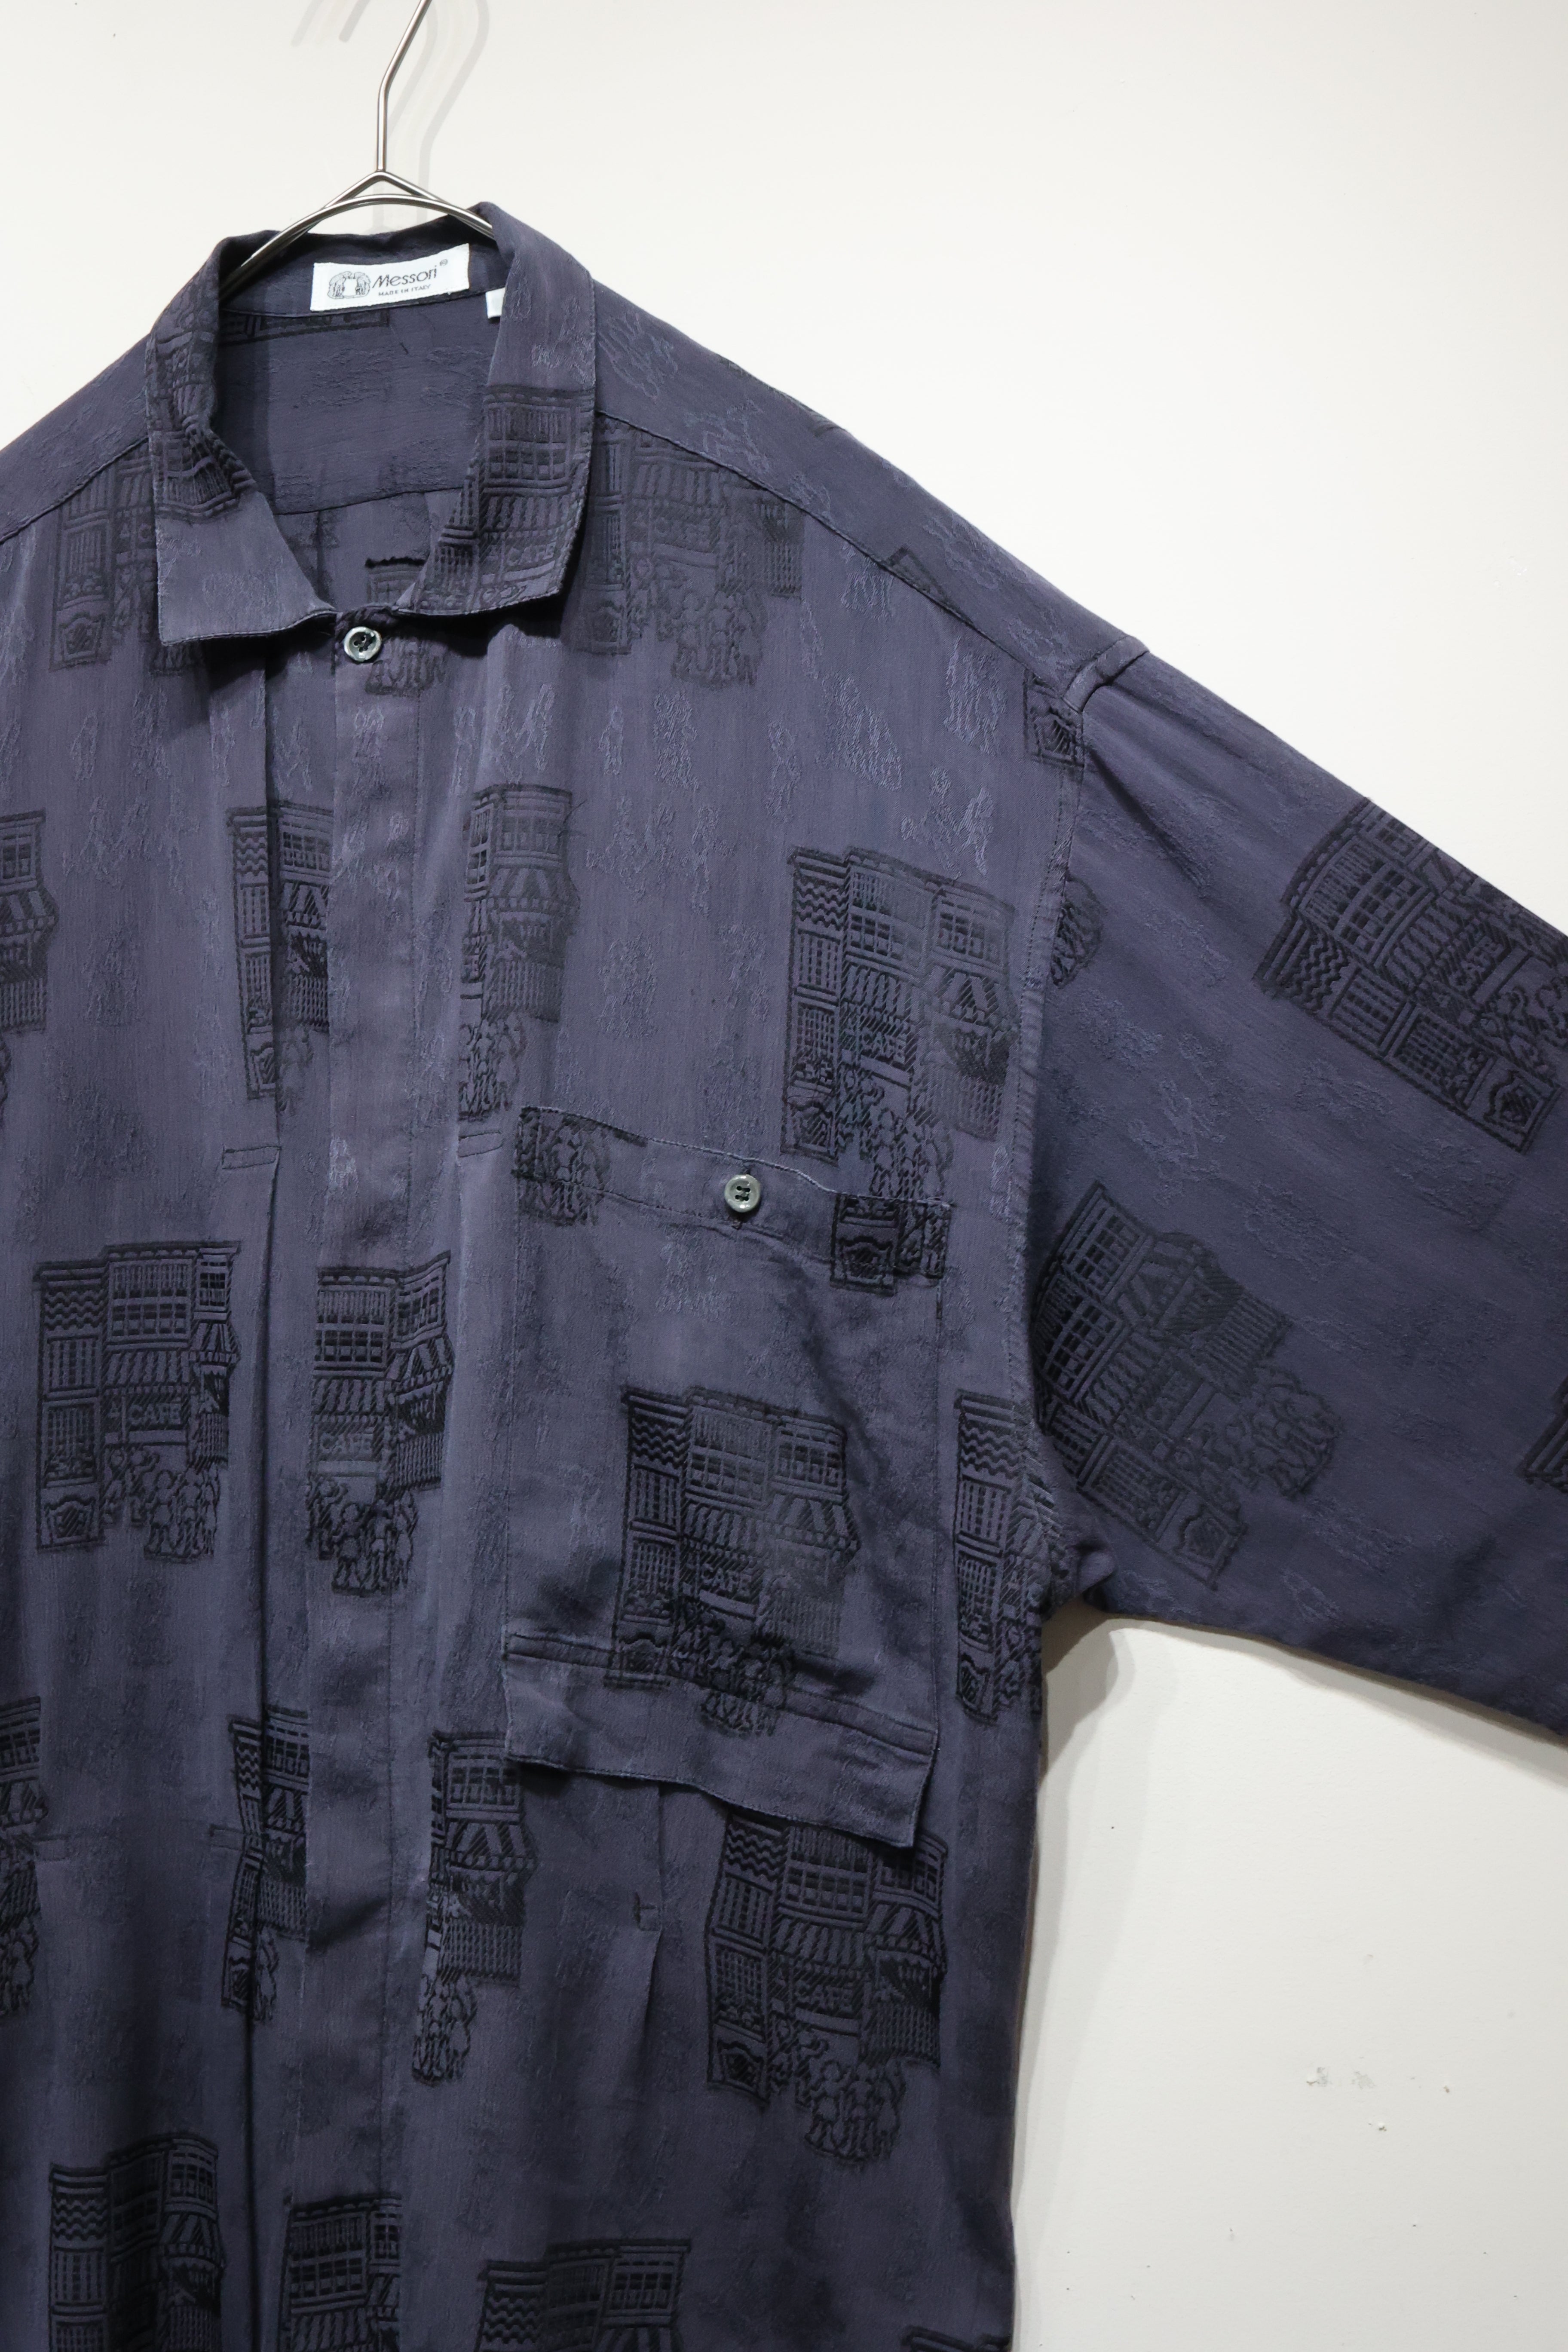 80's cotton/rayon pleated front "CAFE" shirt